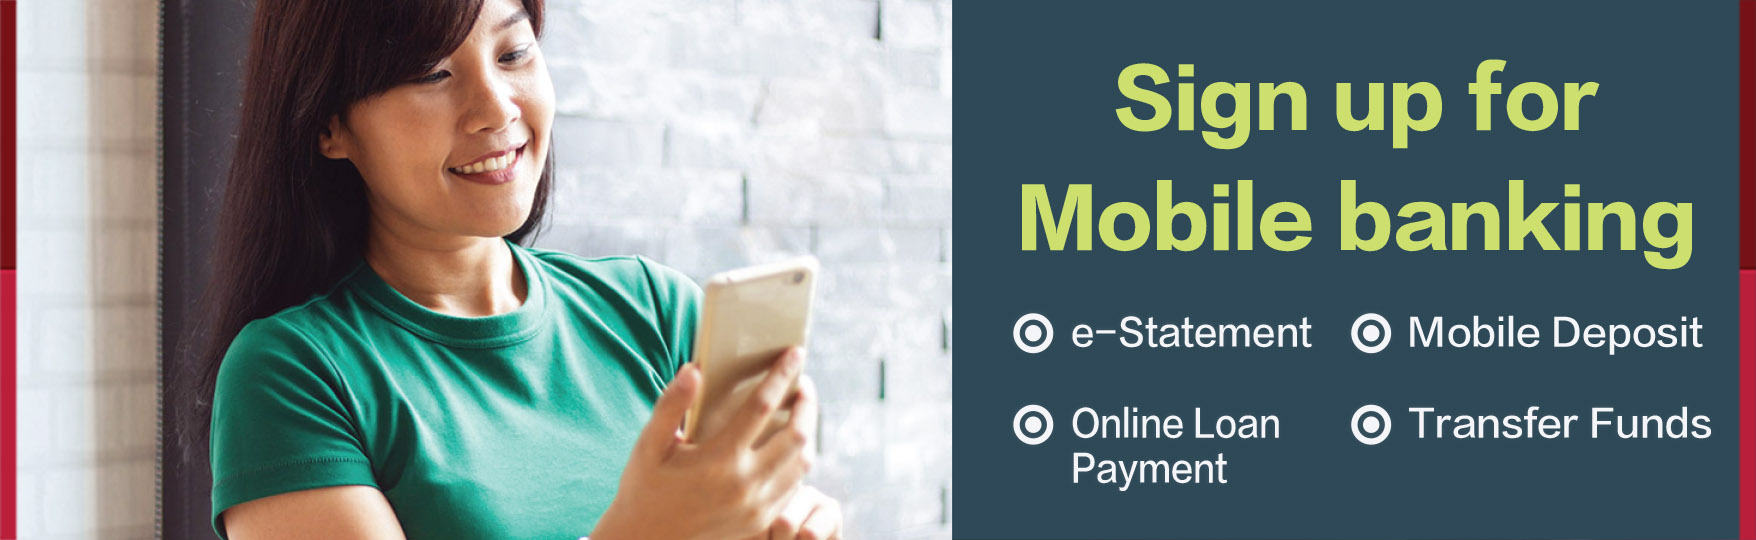 Sign up for mobile banking
- E-statement
- Mobile deposit
- Online loan payment
- Transfer Funds